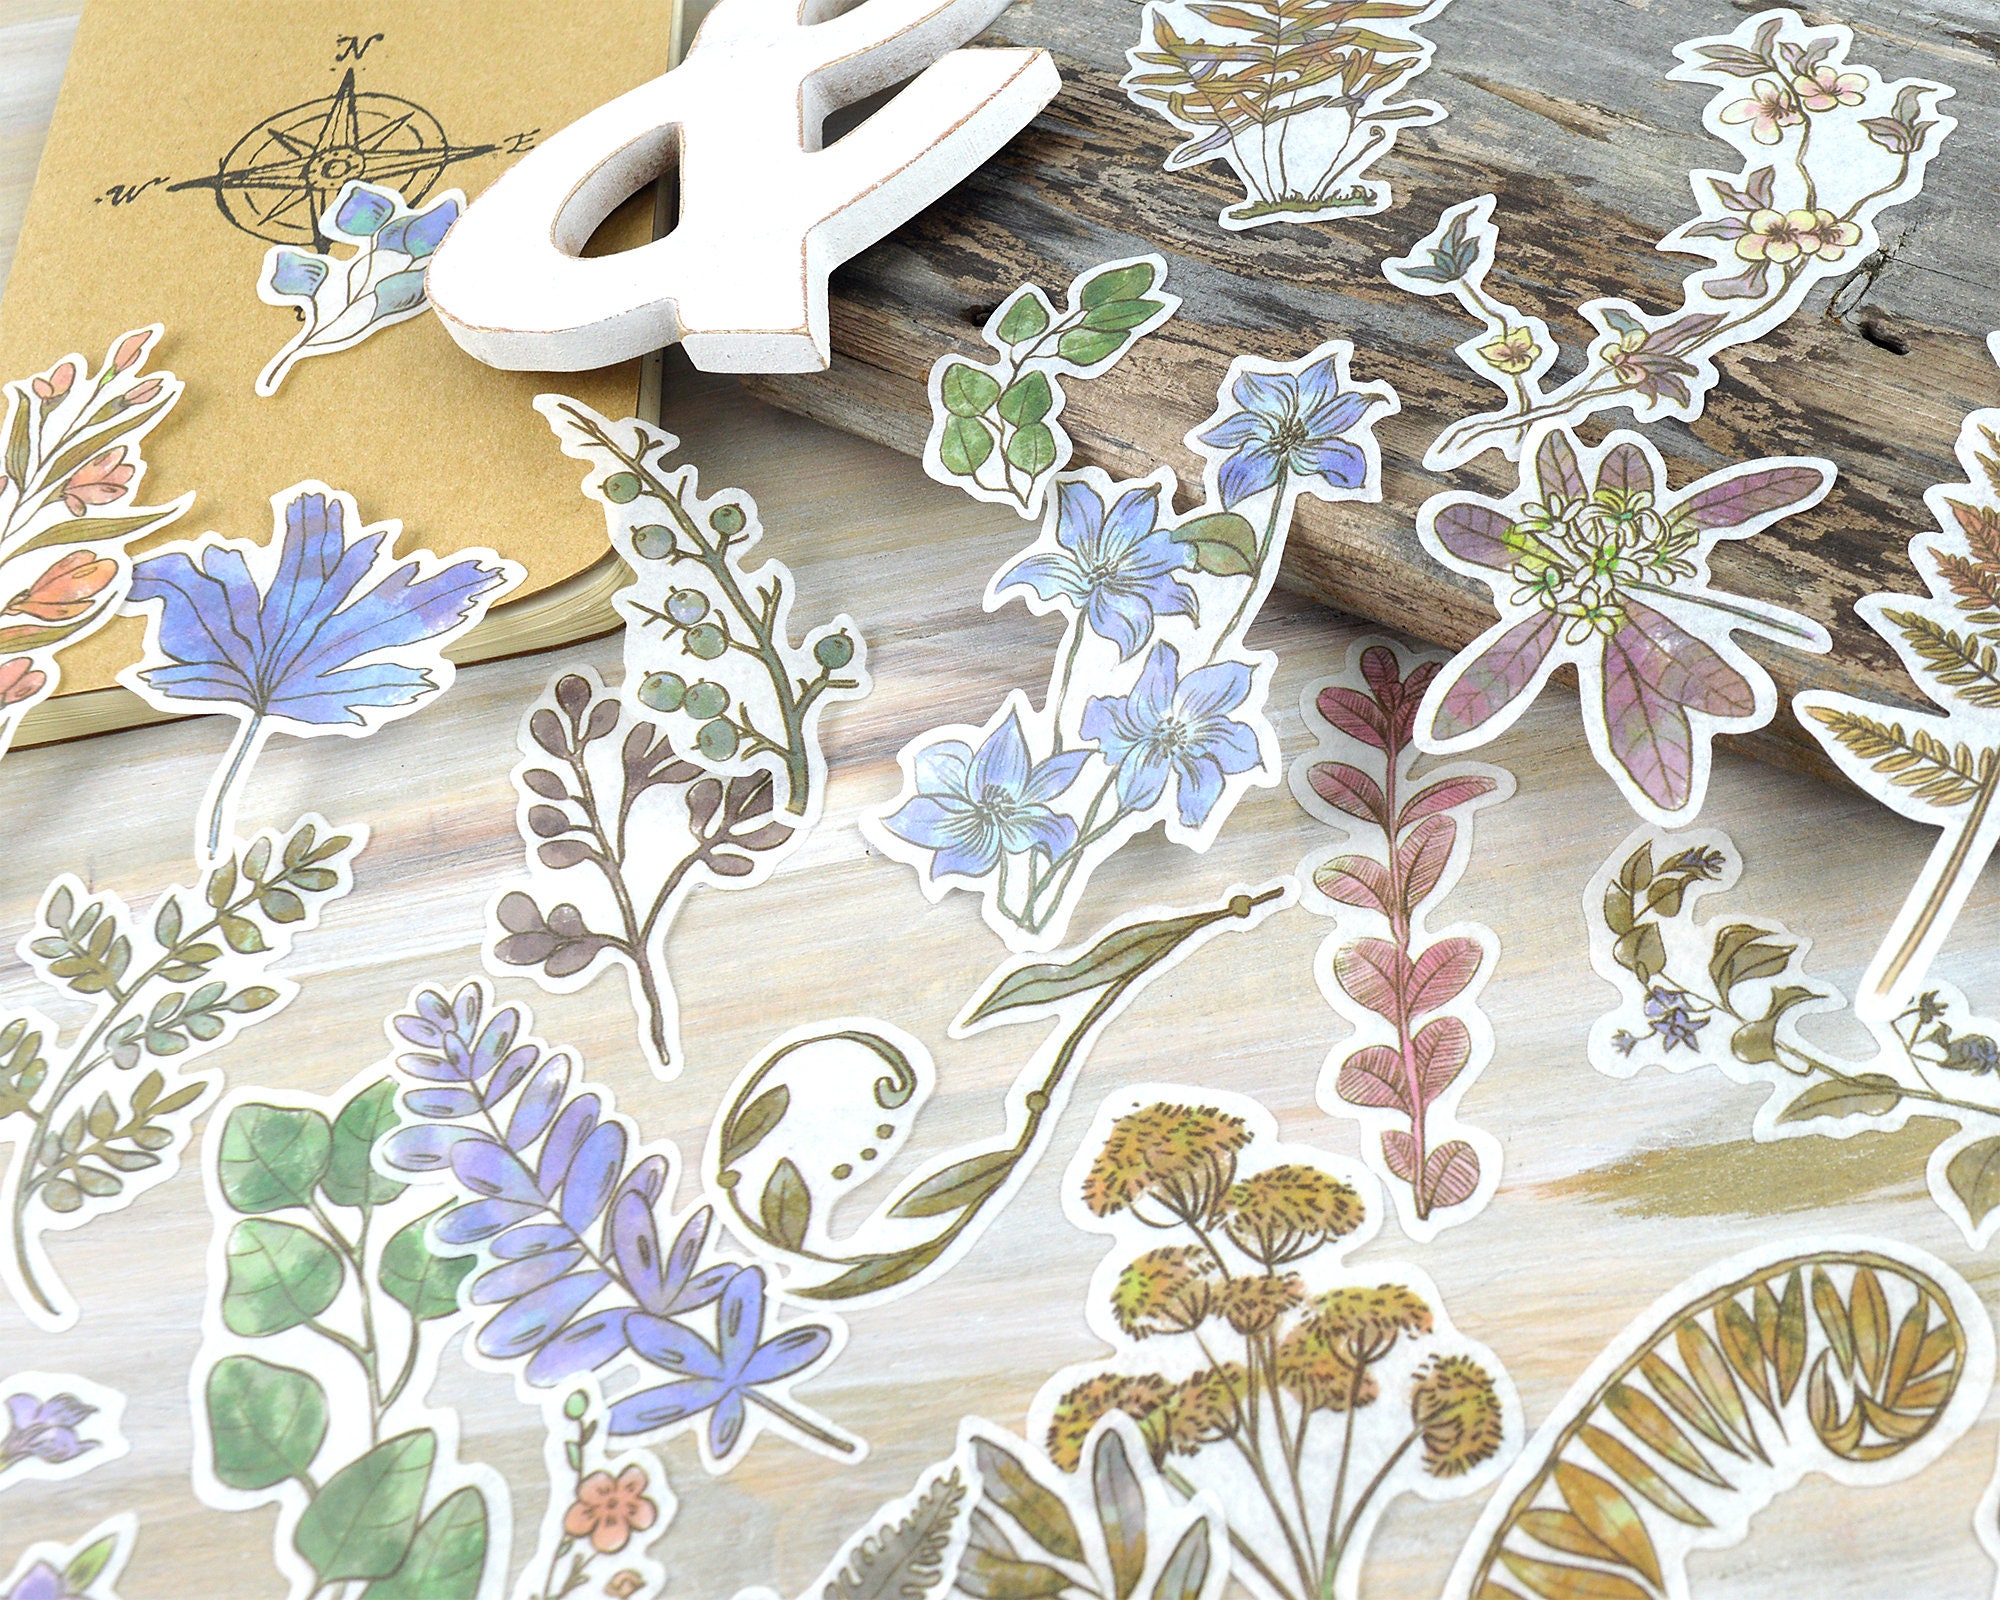 Pressed Flower Washi Stickers 60 pcs, Dried Floral Botanical Stickers -  Printed Heron